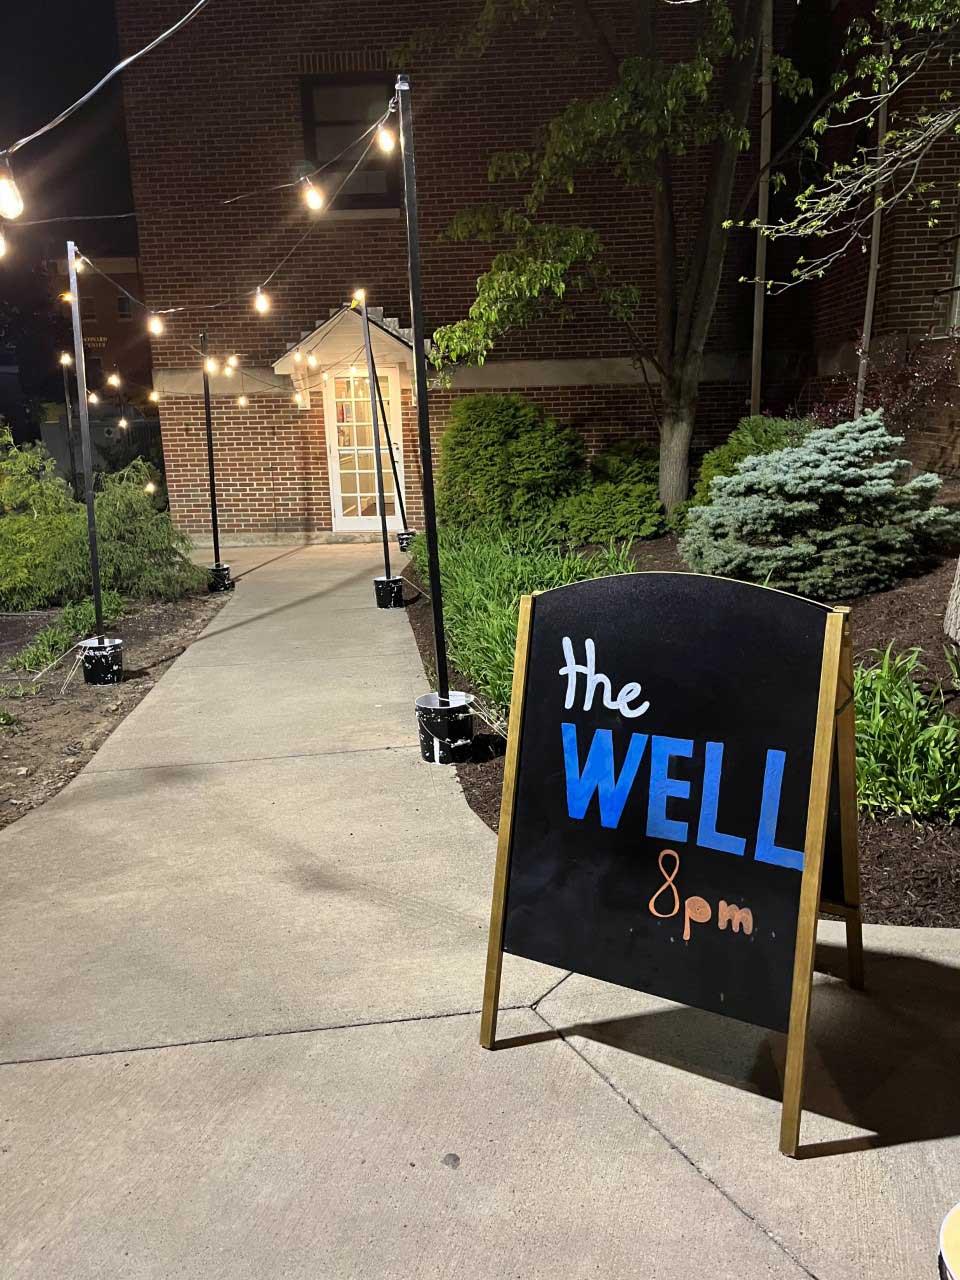 The Well @ 8pm